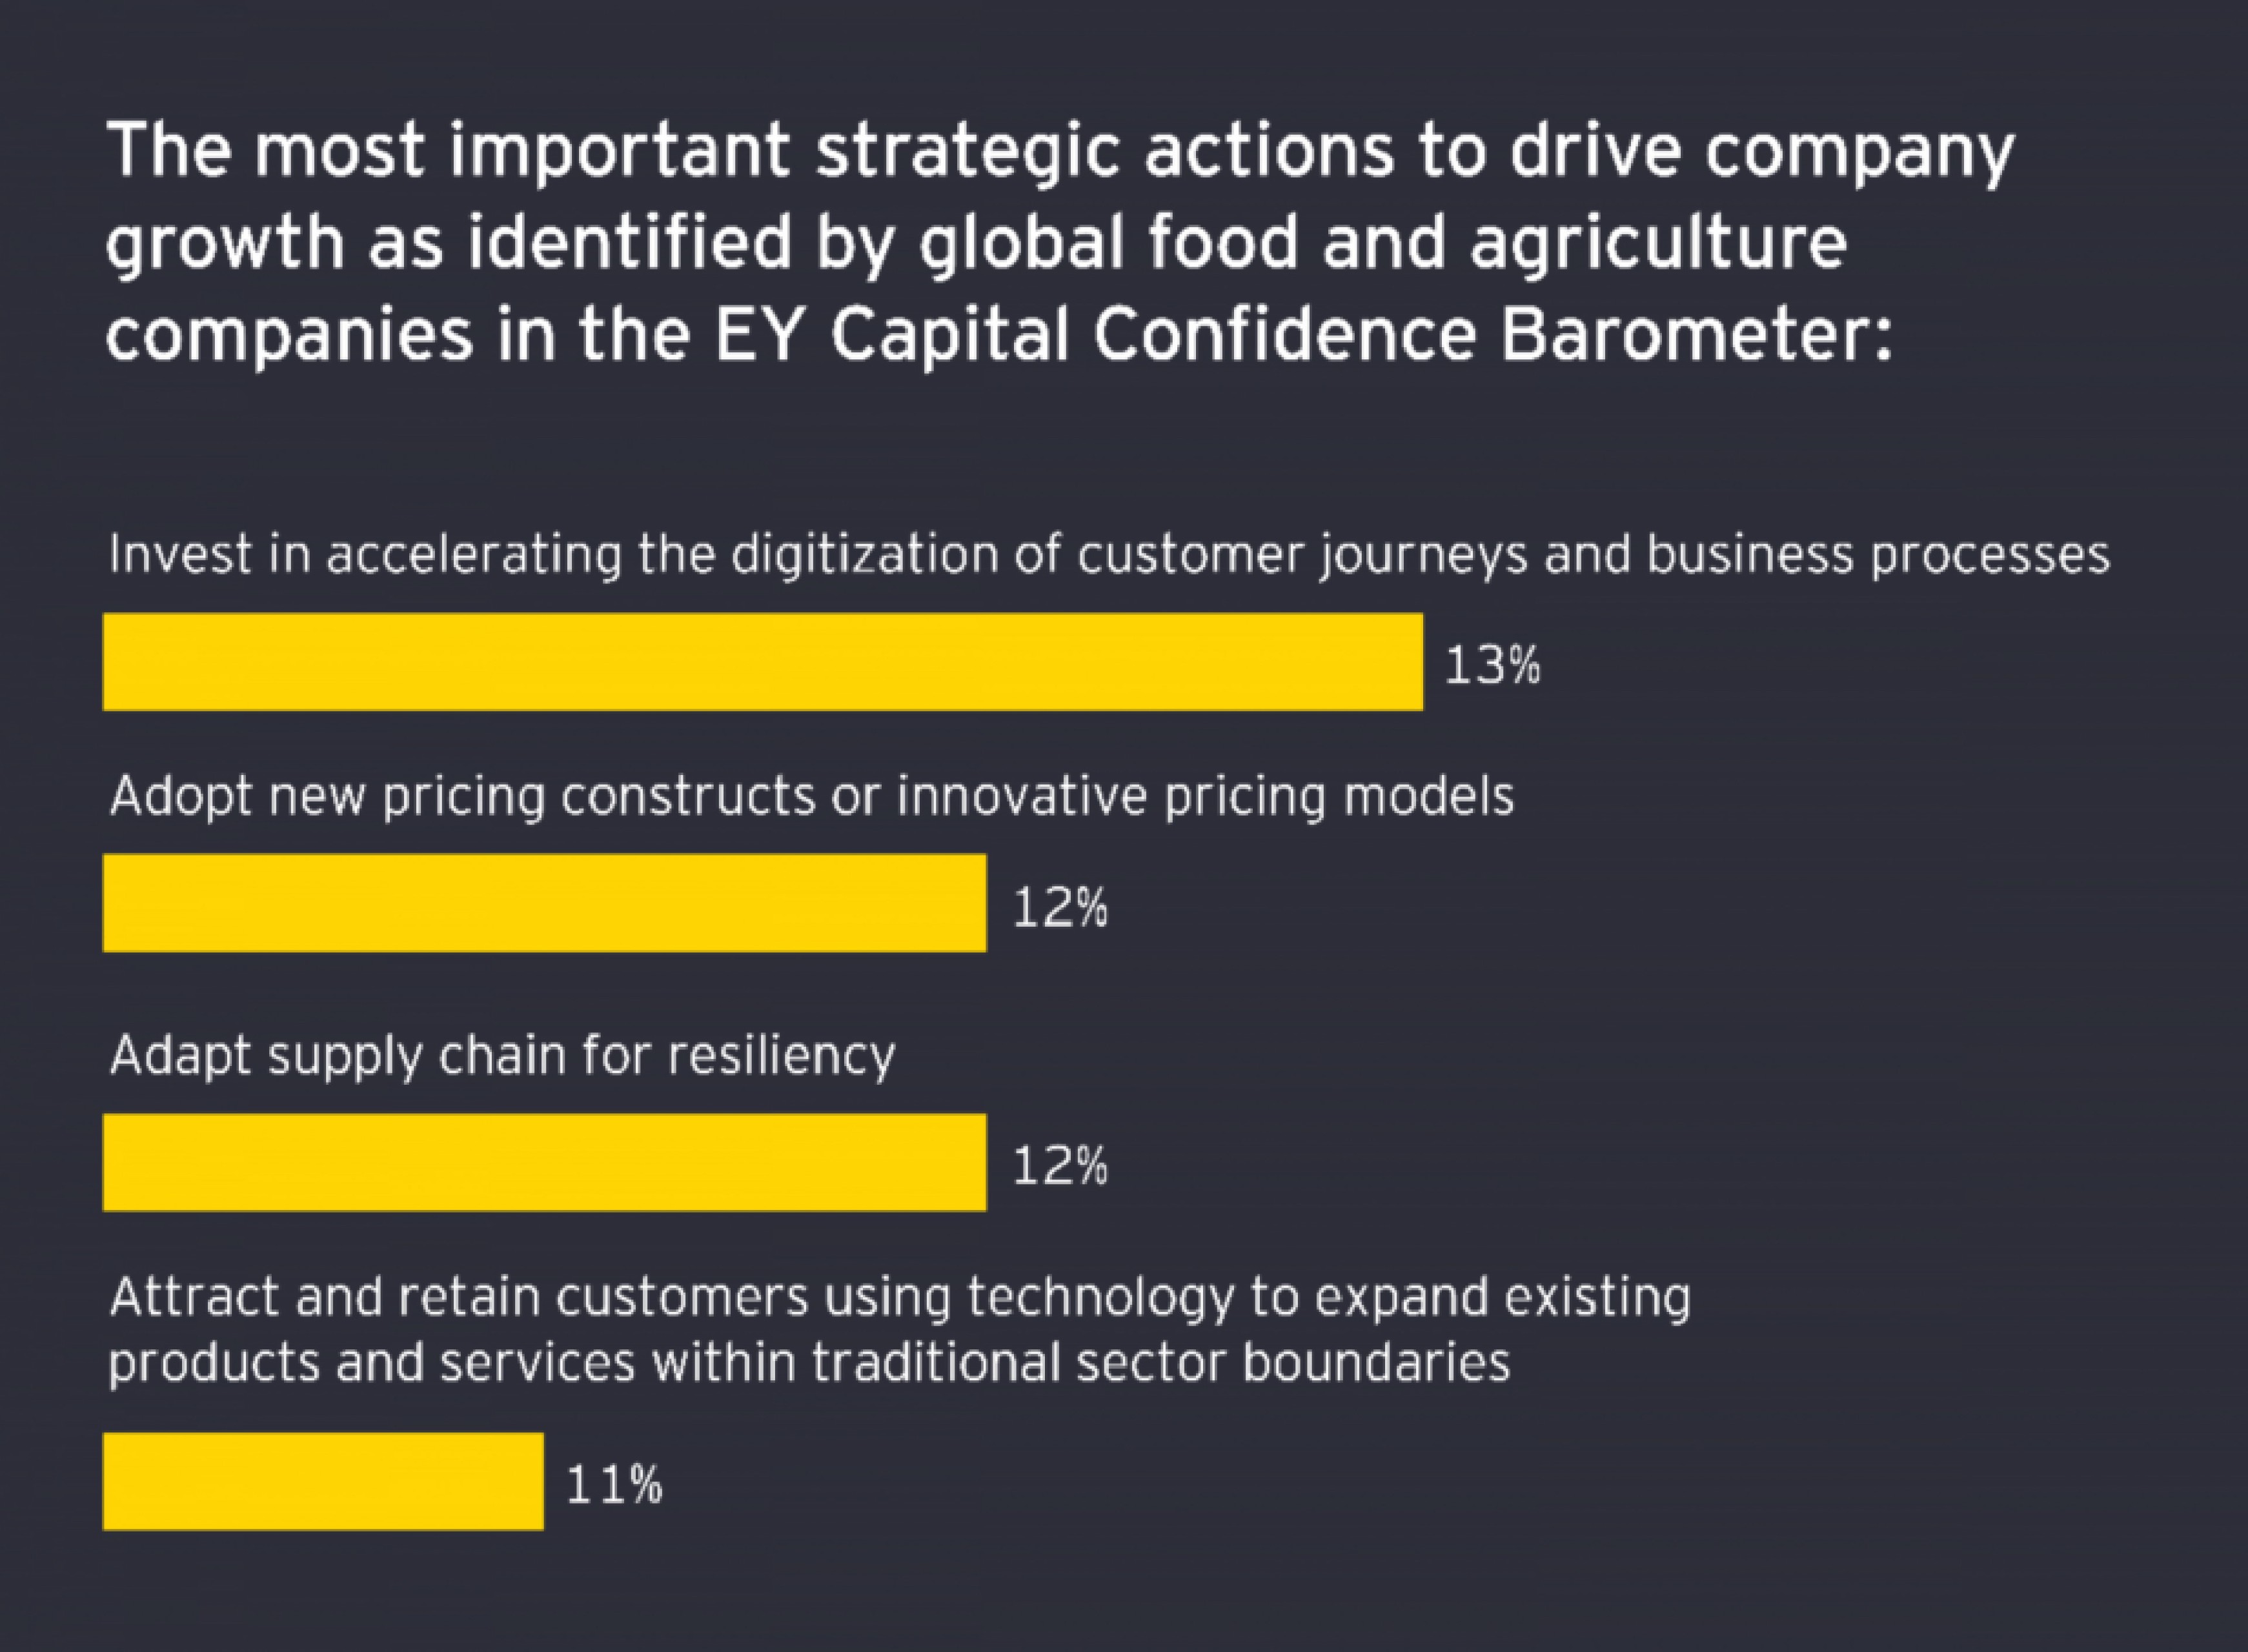 Bar chart of the most important strategic actions to drive company growth as identified by global food and agriculture companies in the EY Capital Confidence Barometer